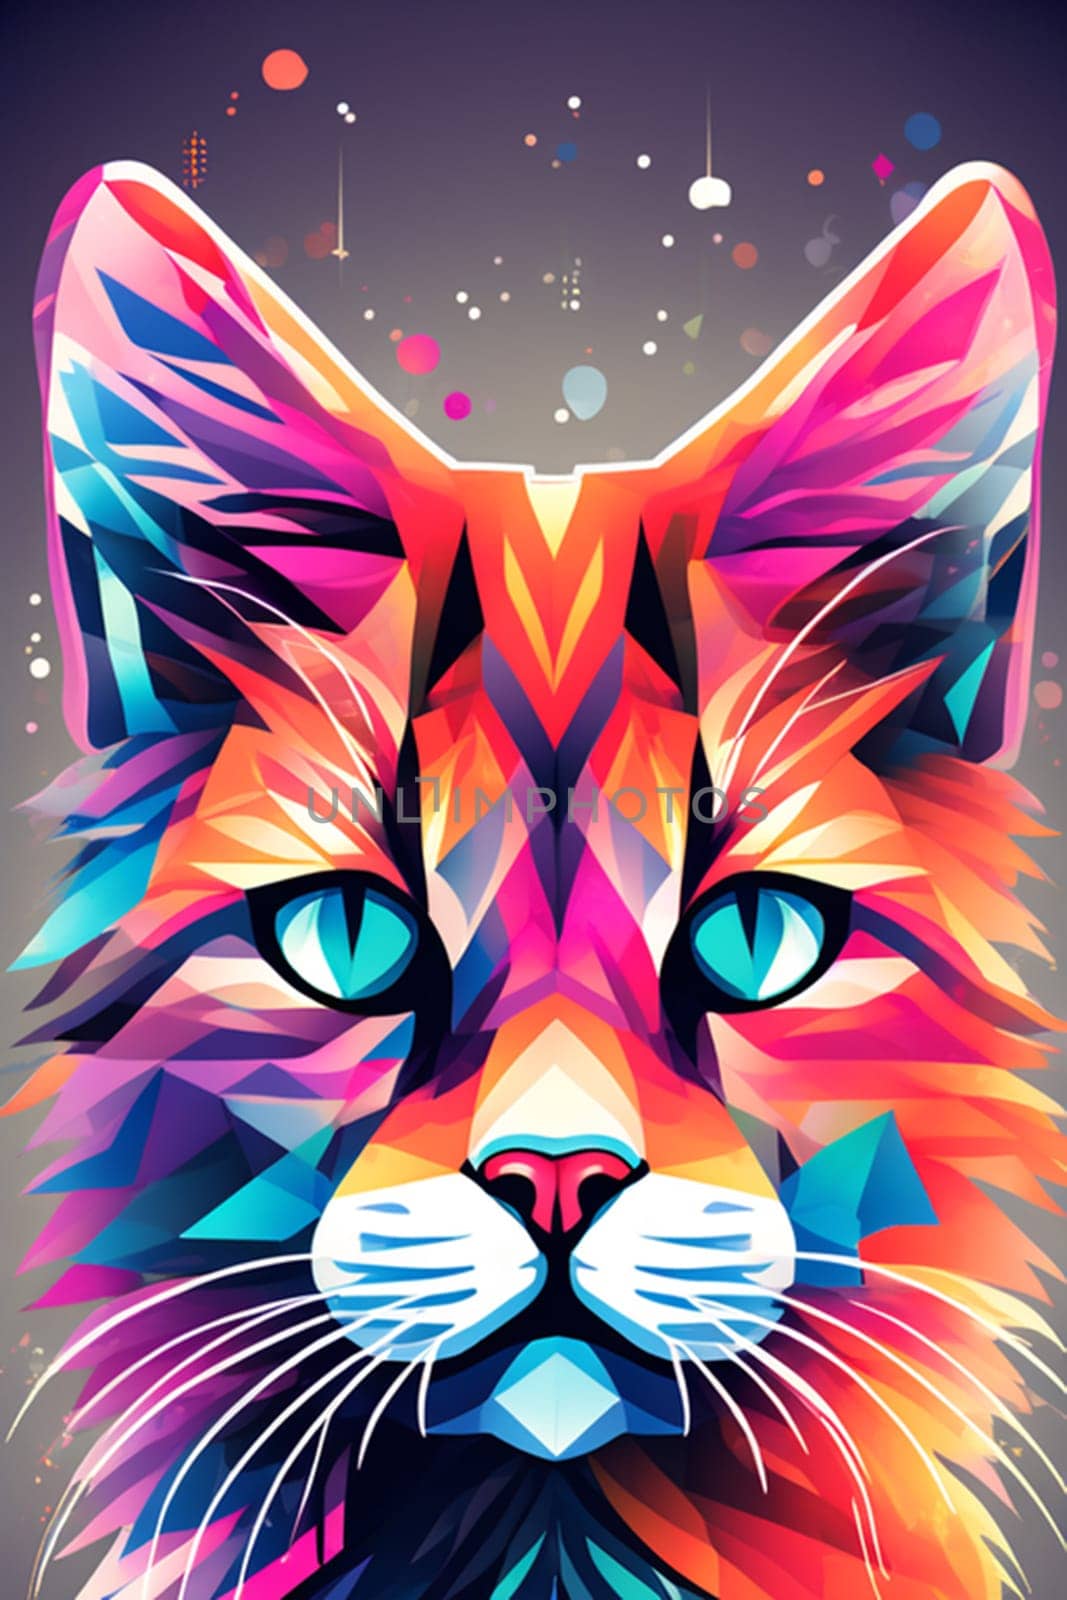 Cat head in pop art style. Minimalist style, neon line logo, depicting a mosaic geometric cat surrounded by vibrant smoke effects on a scarlet background by Ekaterina34